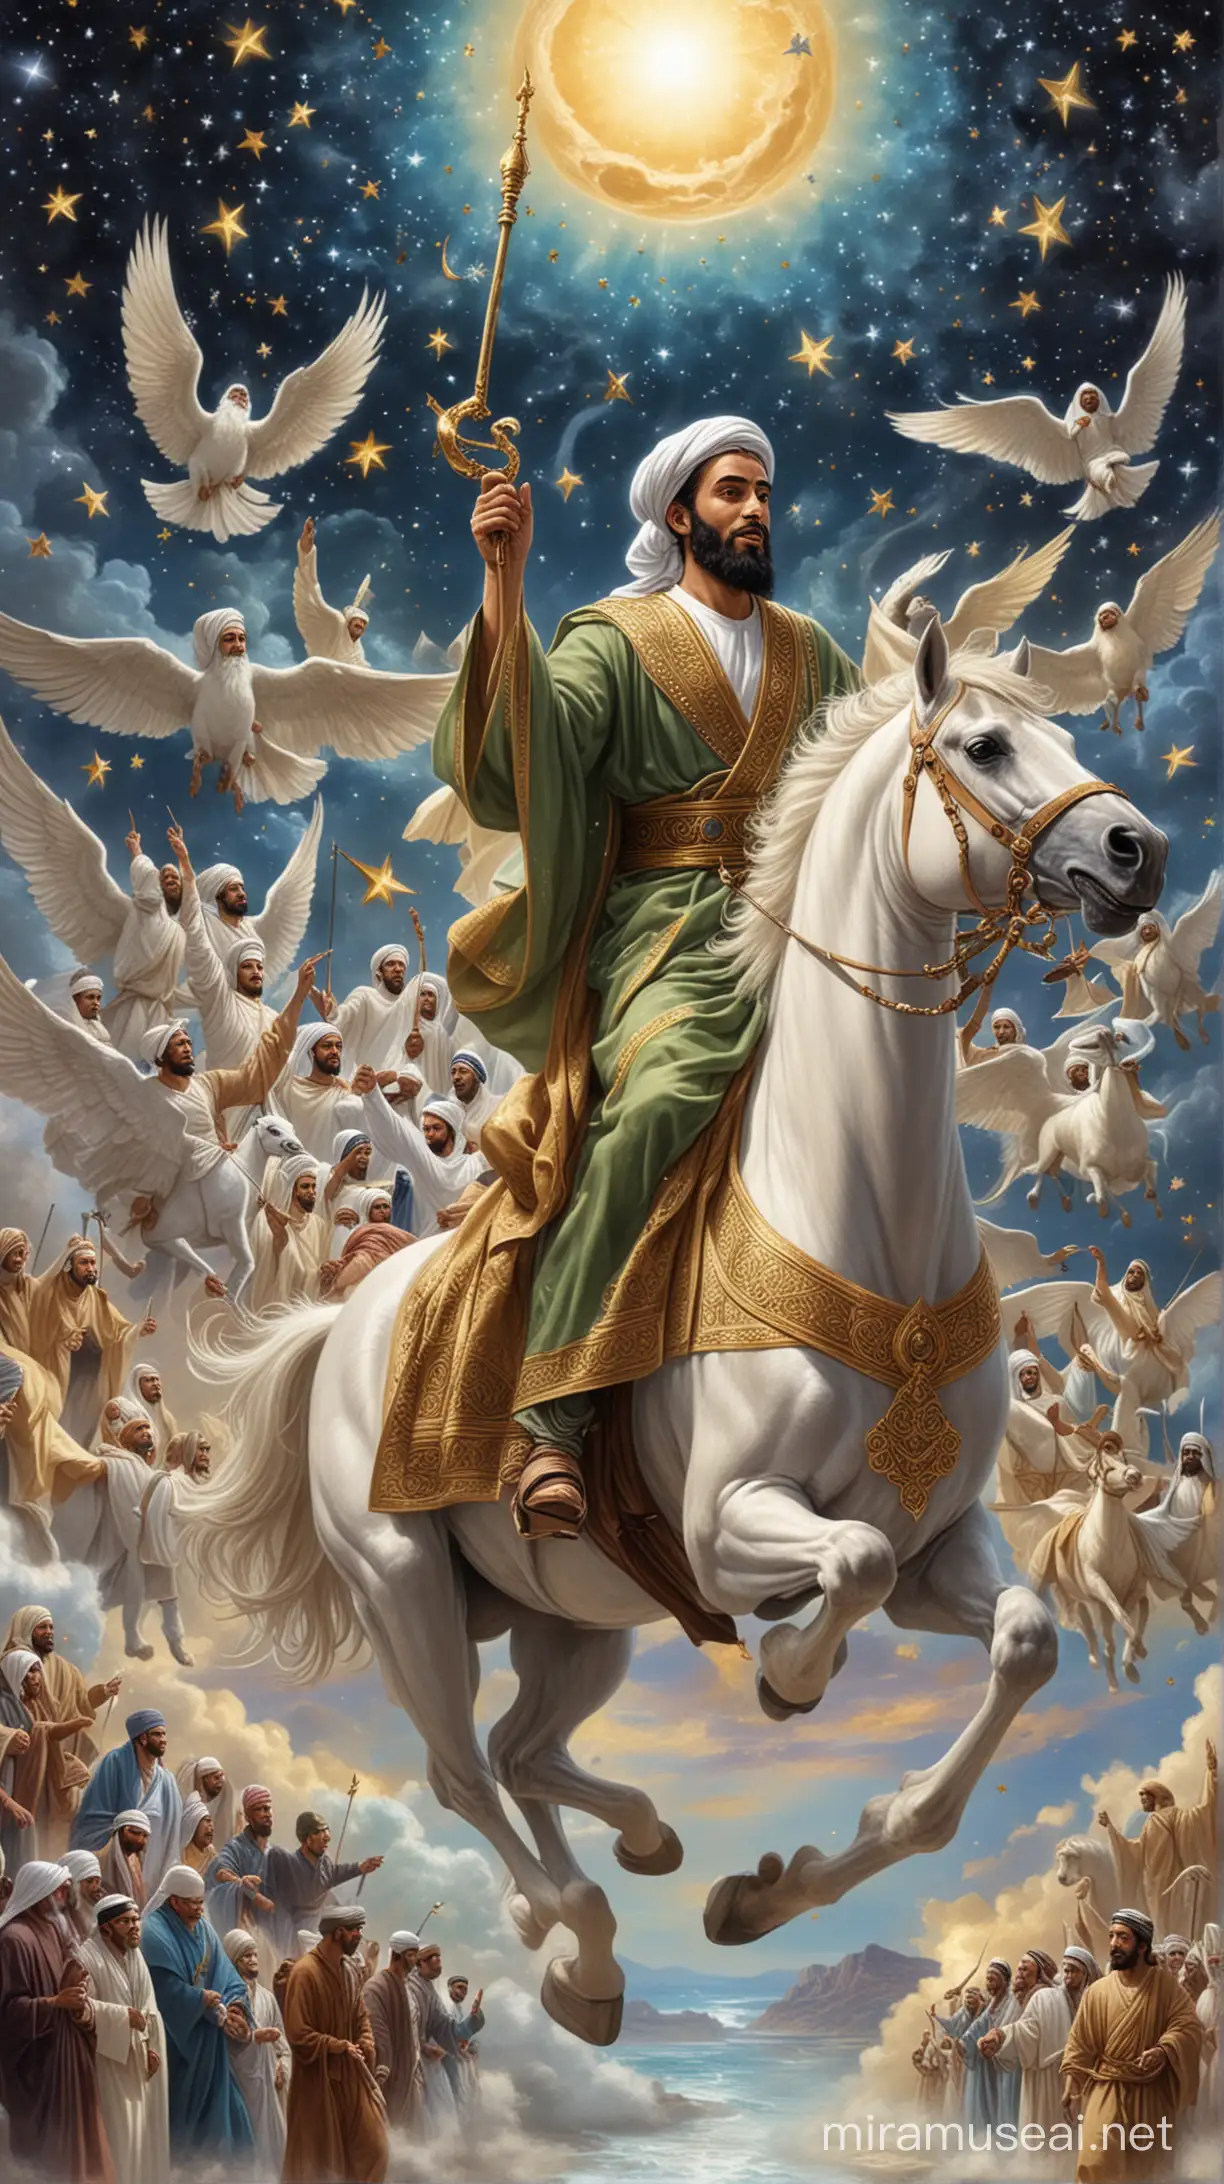 A Heavenly Journey with Prophet Muhammad (Sallallahu alaihi wa sallam): Depict Prophet Muhammad (Sallallahu alaihi wa sallam) riding the Buraq, a celestial steed, as he ascends through the heavens during the Miraj journey, surrounded by angels and stars.